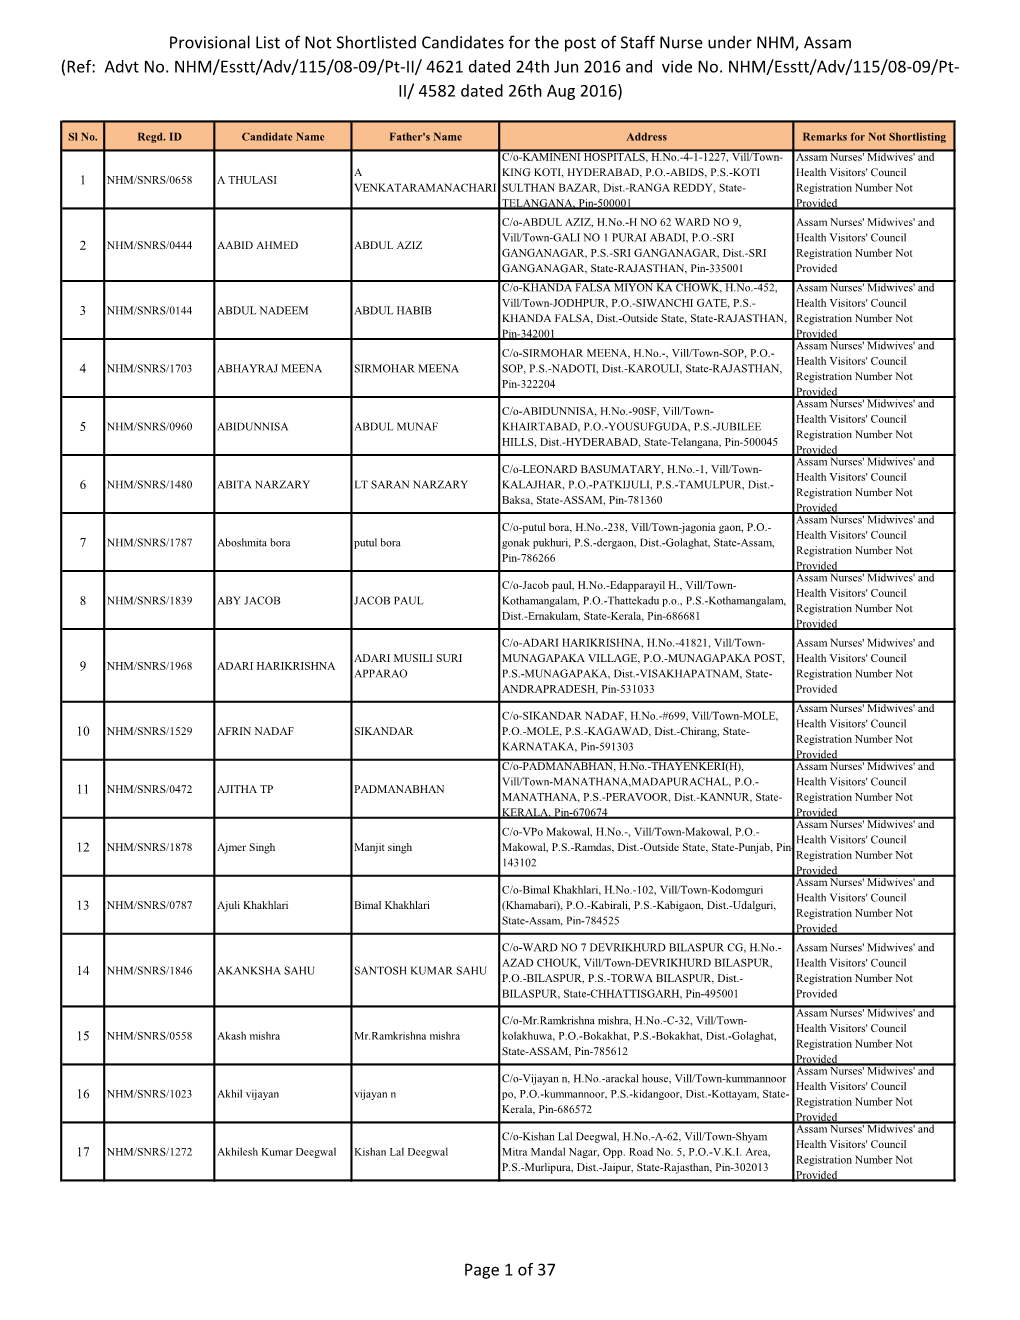 Provisional List of Not Shortlisted Candidates for the Post of Staff Nurse Under NHM, Assam (Ref: Advt No